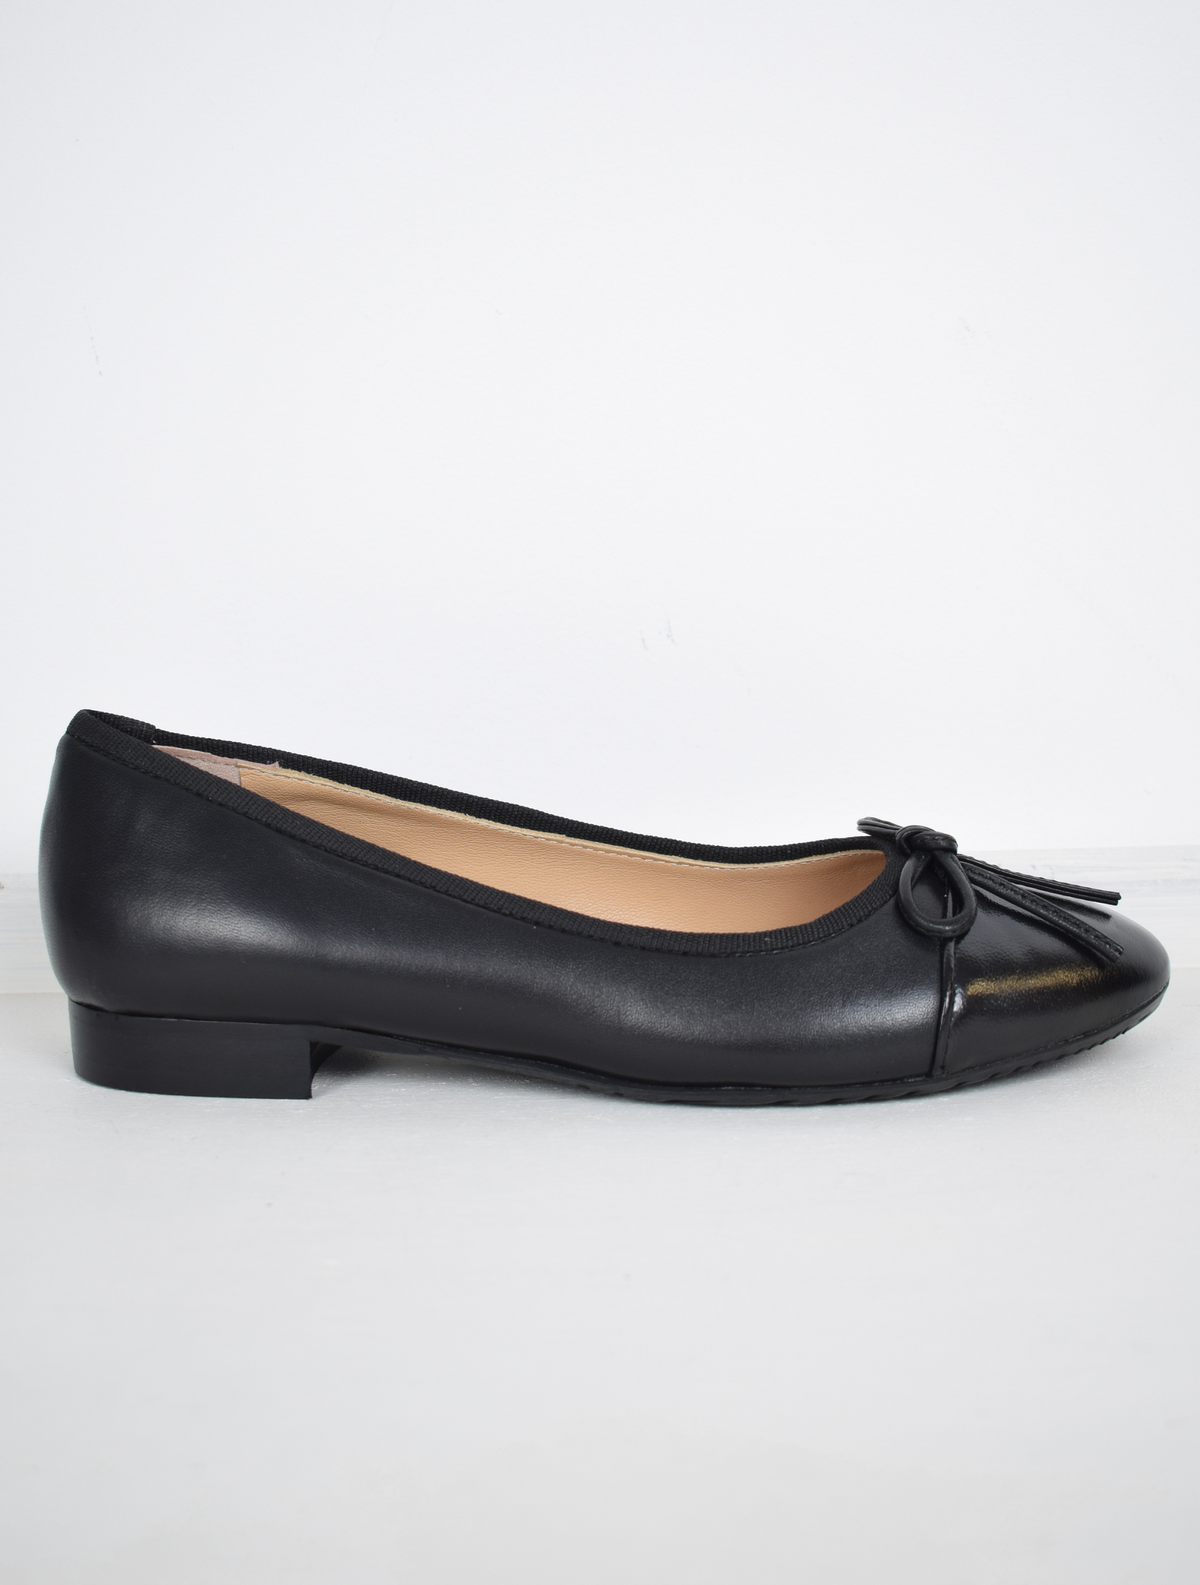 Black leather ballet flats with bow detail